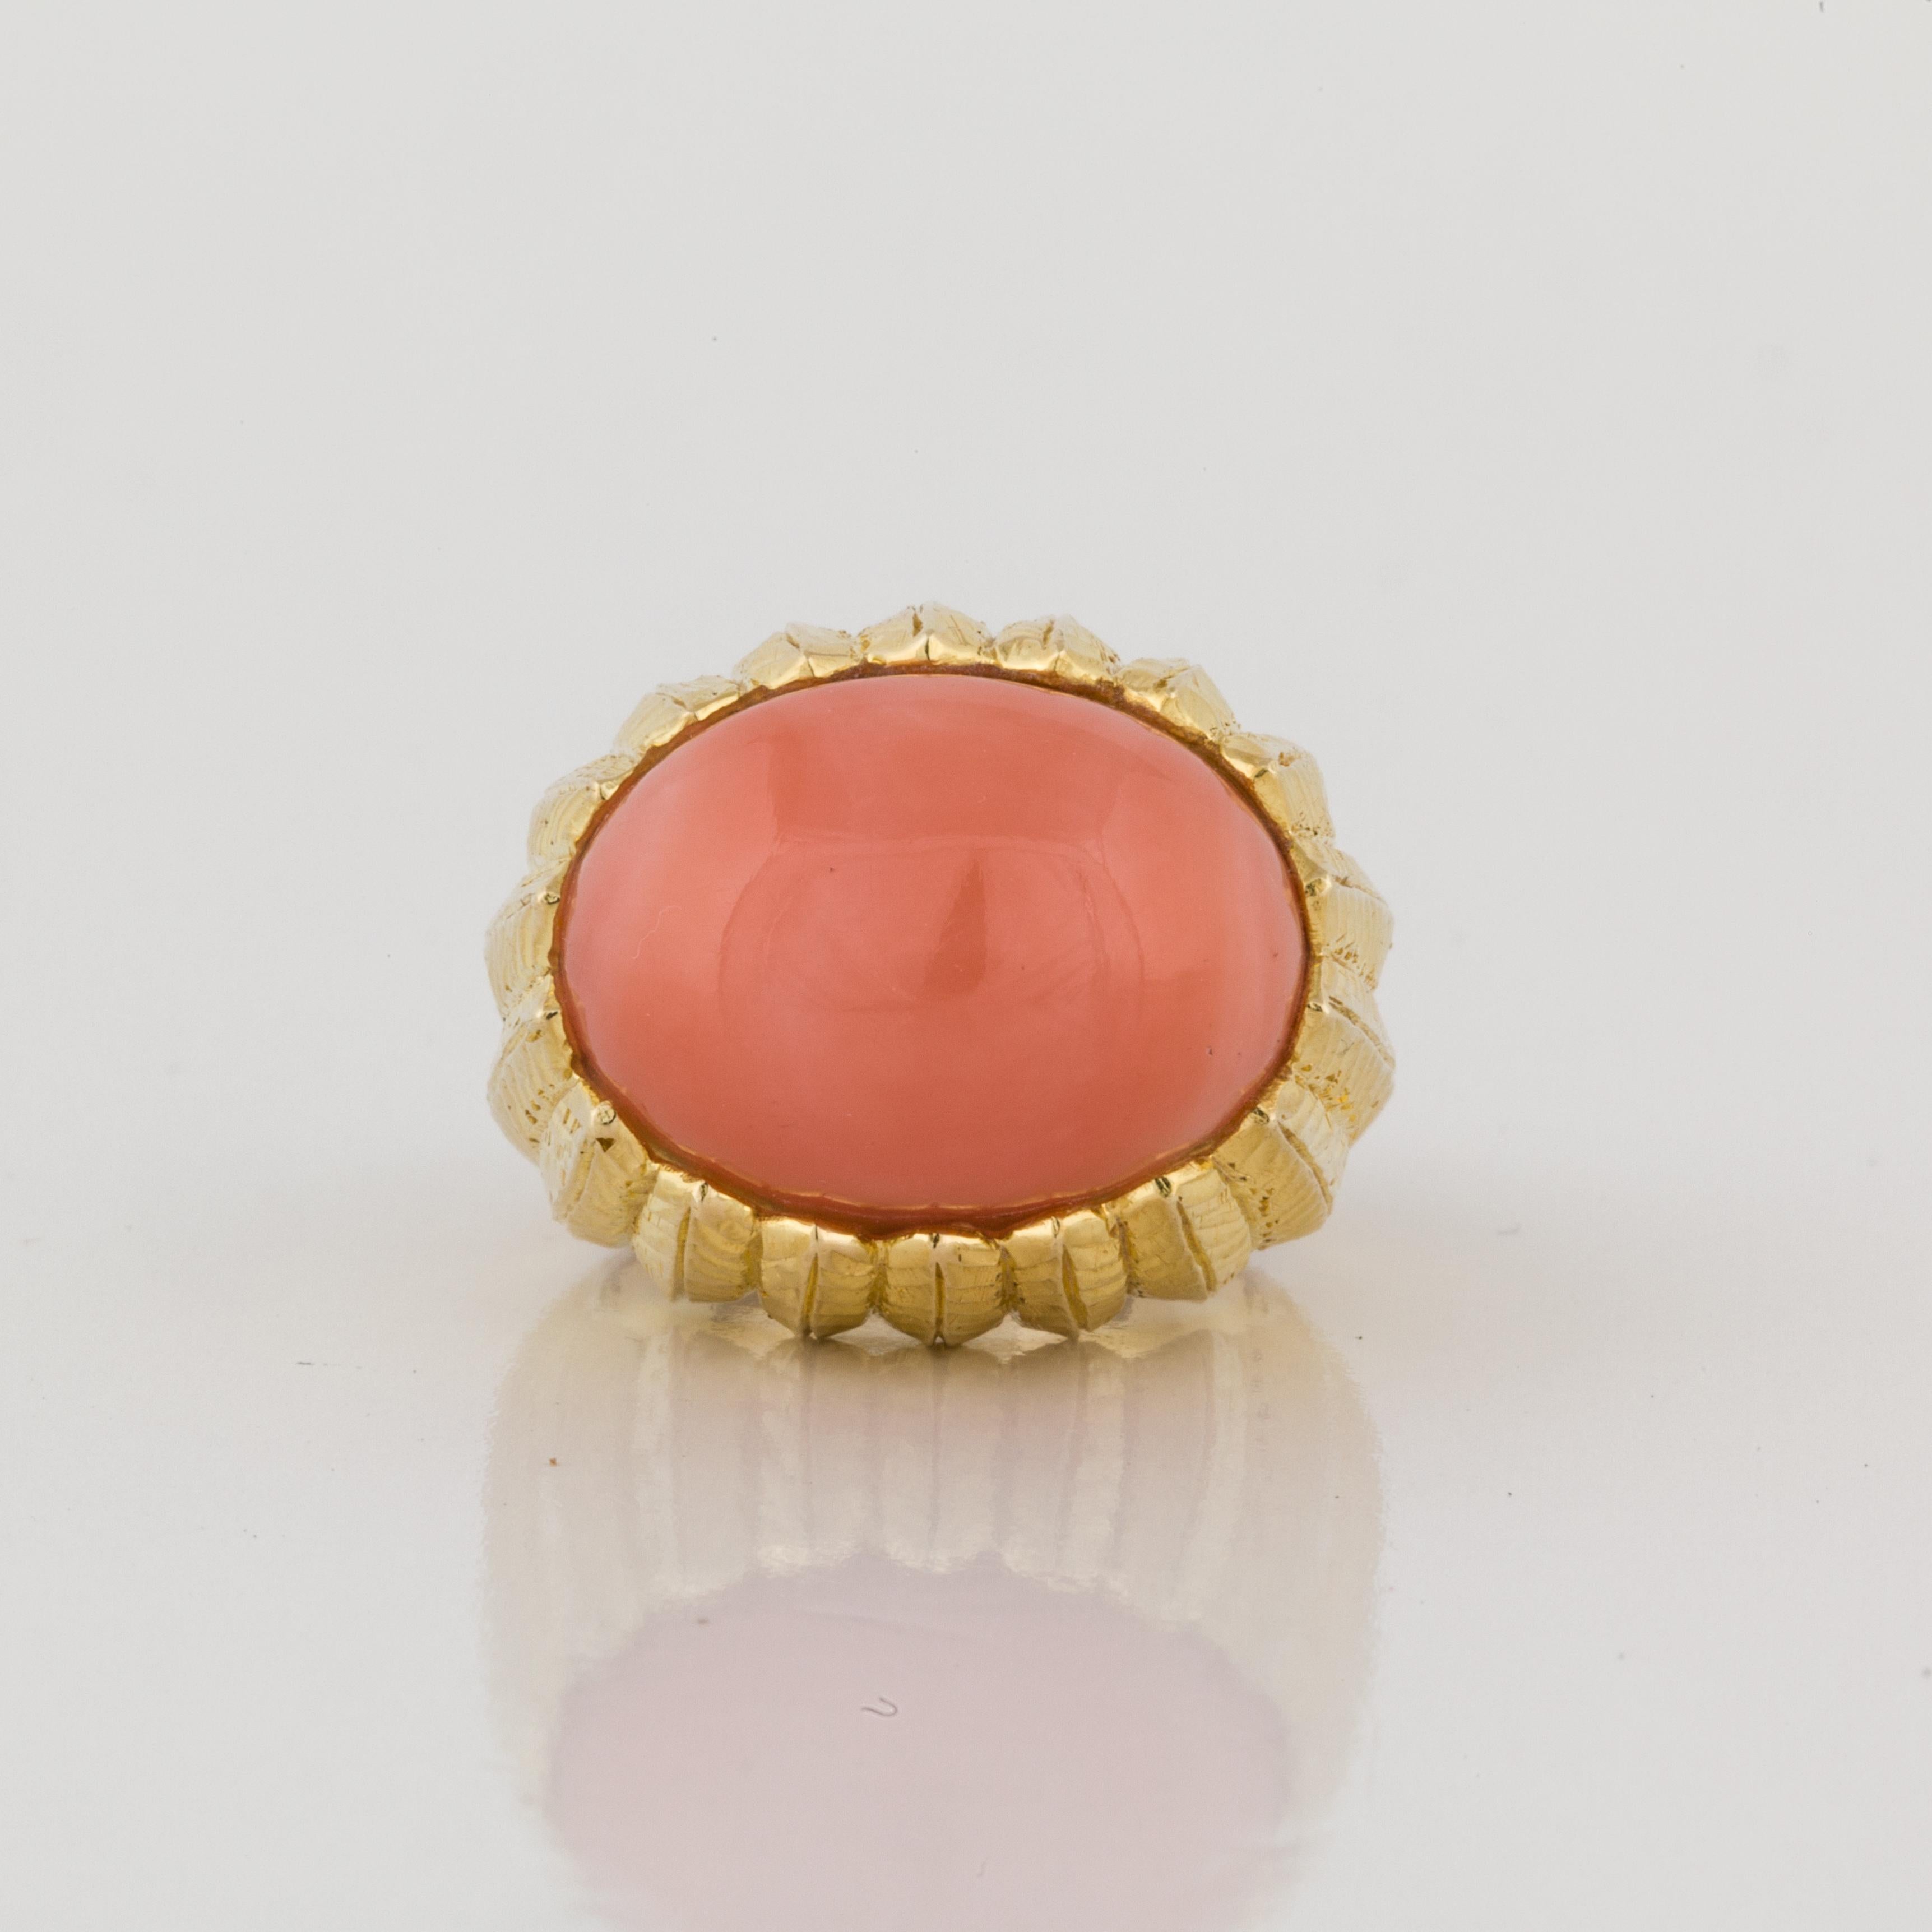 18K hand chased gold ring featuring an oval cabochon coral.  Measures 7/8 inches long by 3/4 inches wide and stands 5/8 inches off the finger.